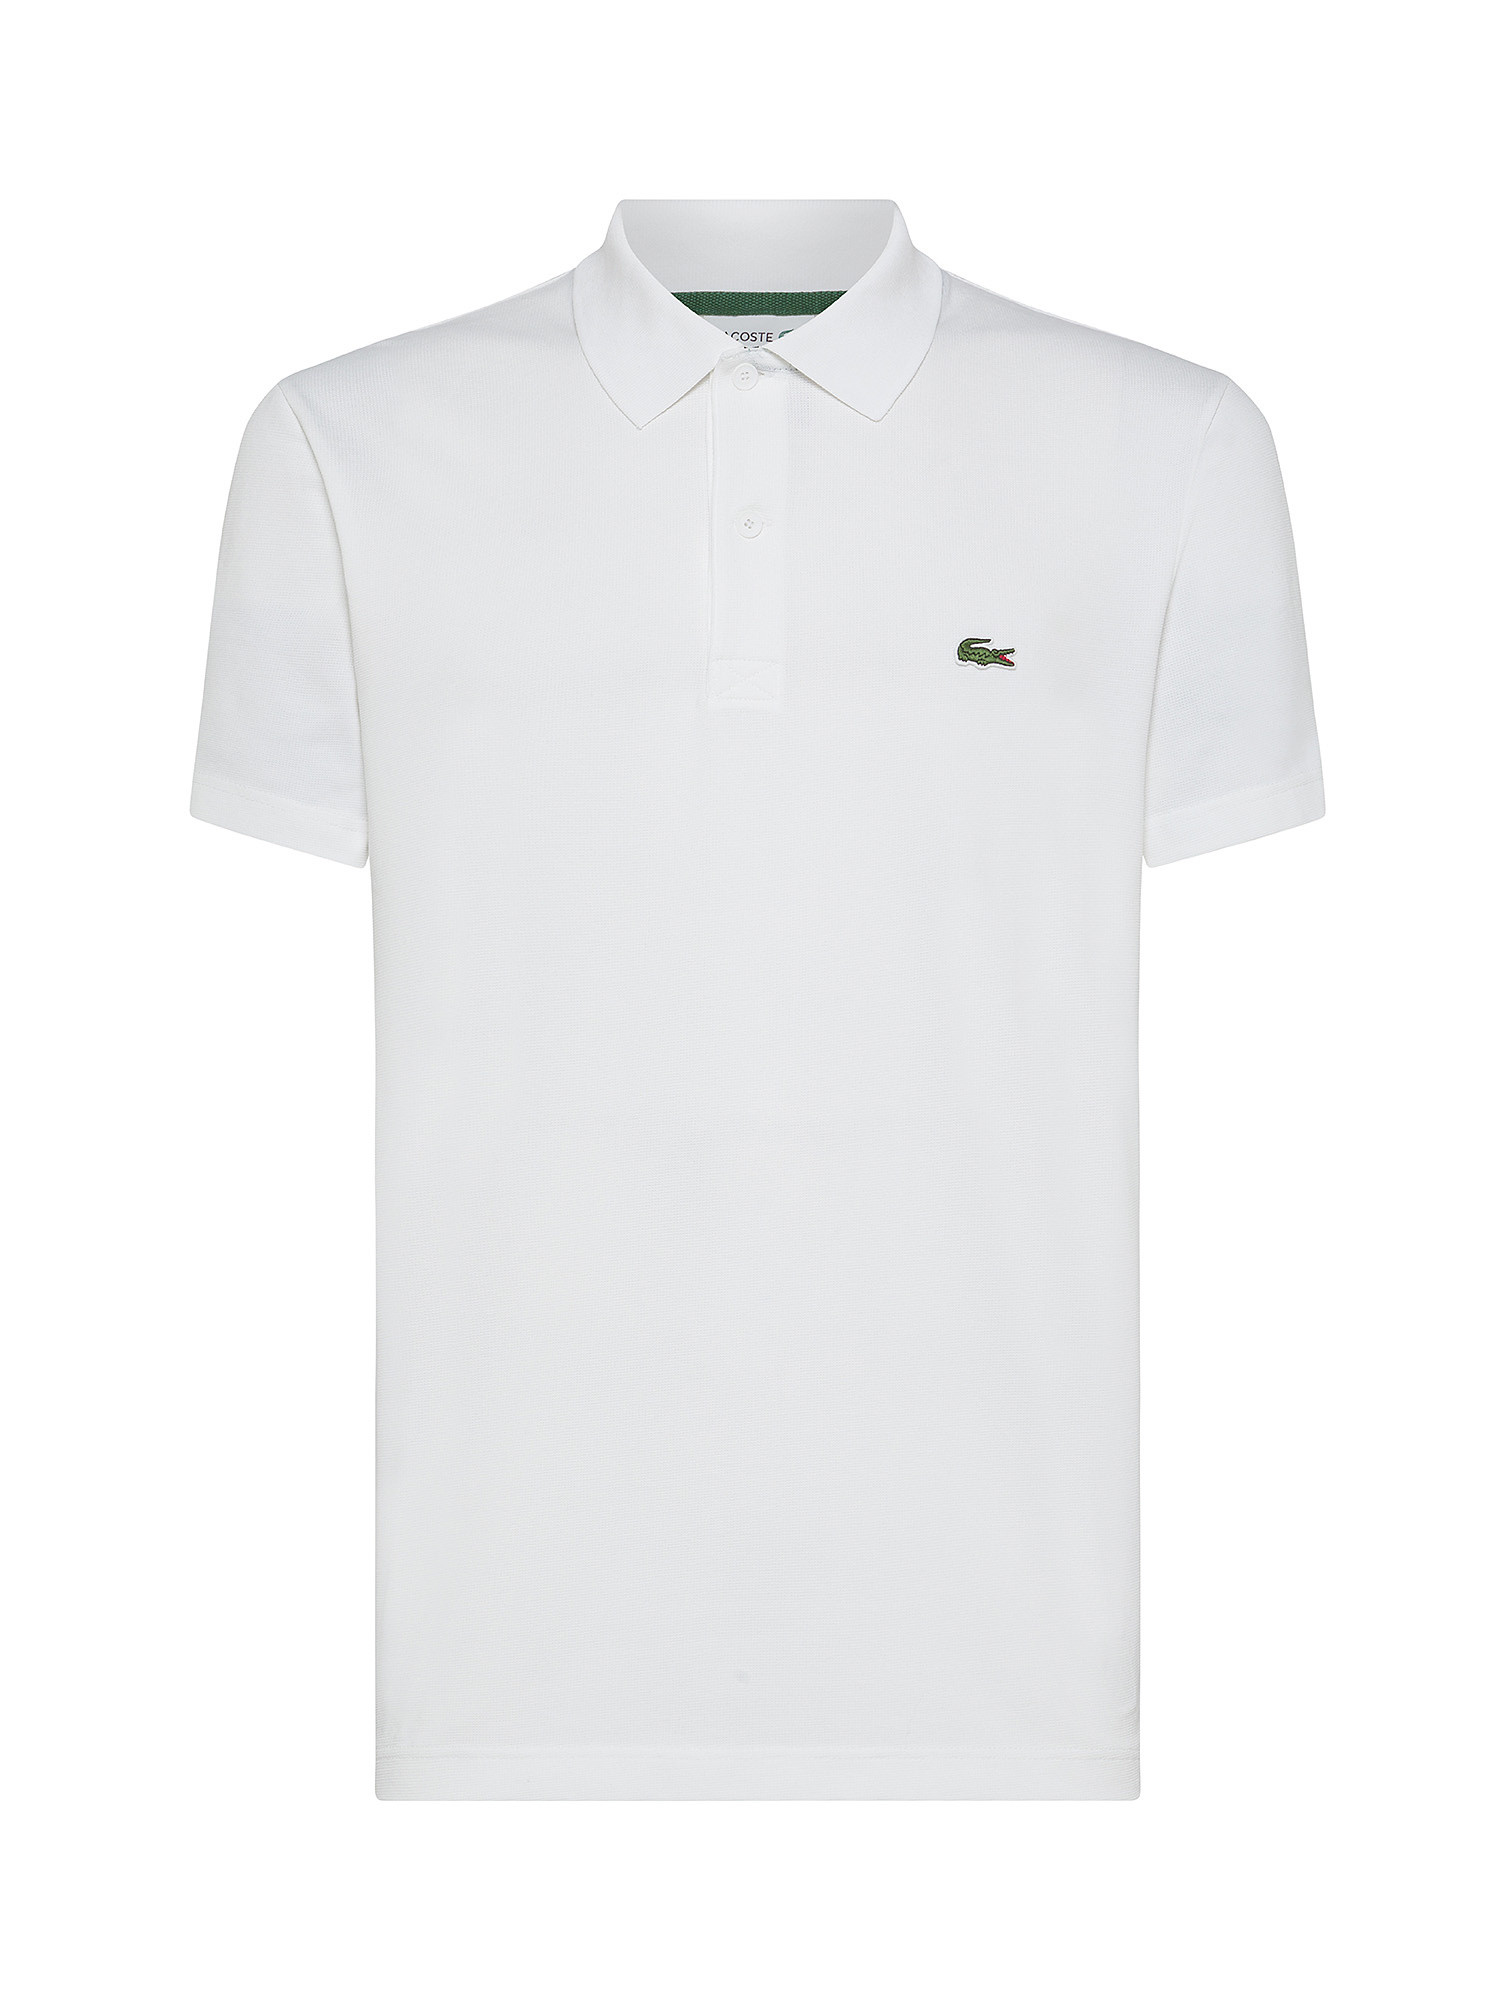 Lacoste - Regular fit stretch polo, White, large image number 0